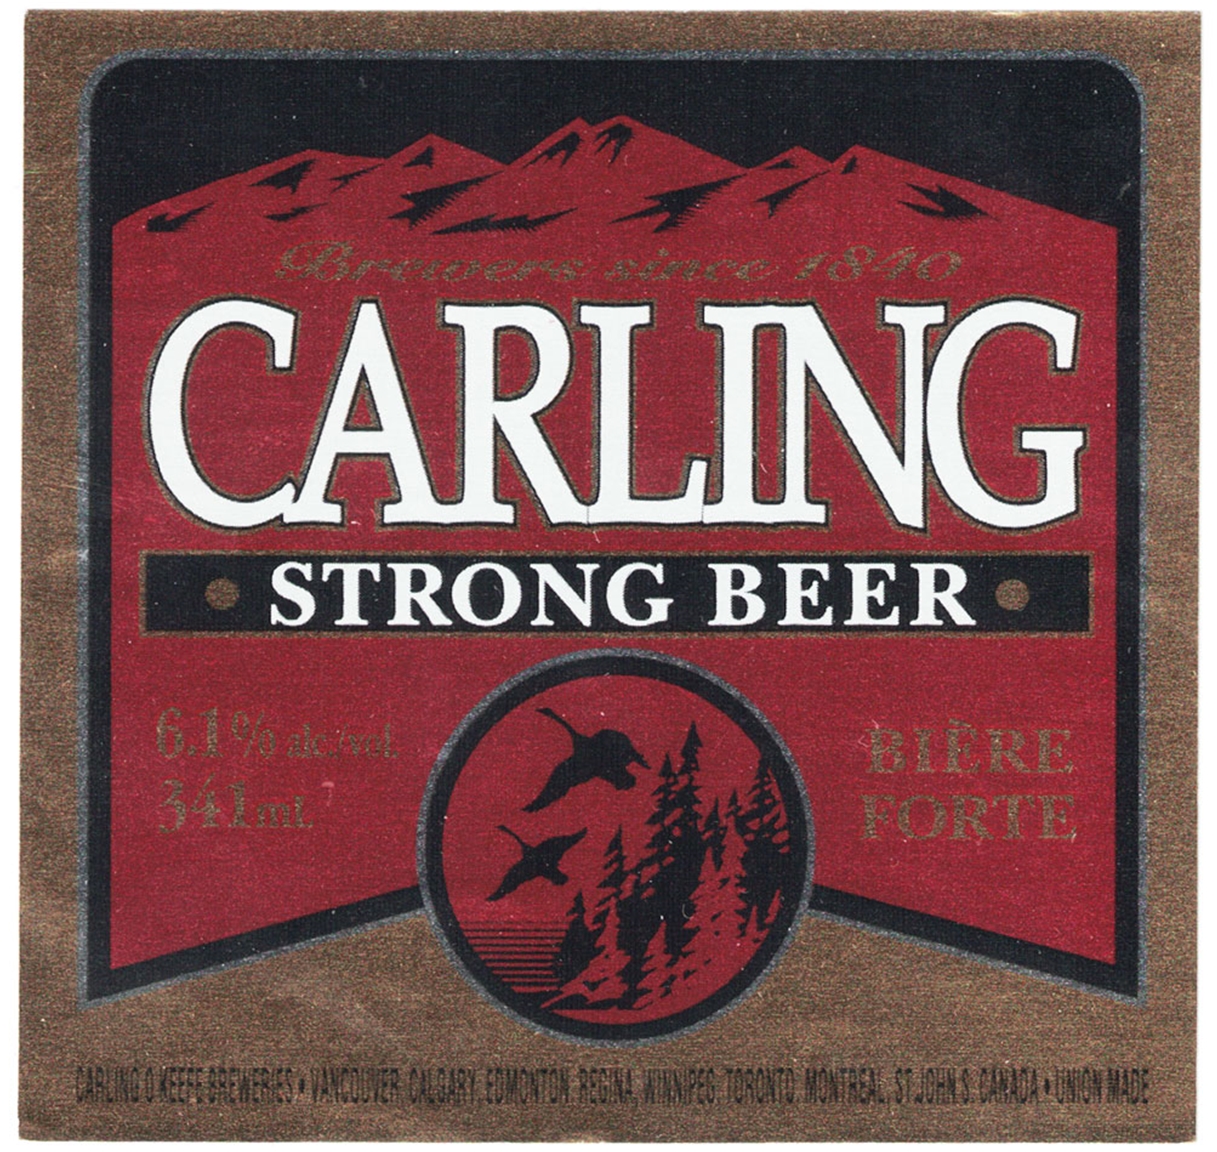 Carling Strong Beer Bière Label